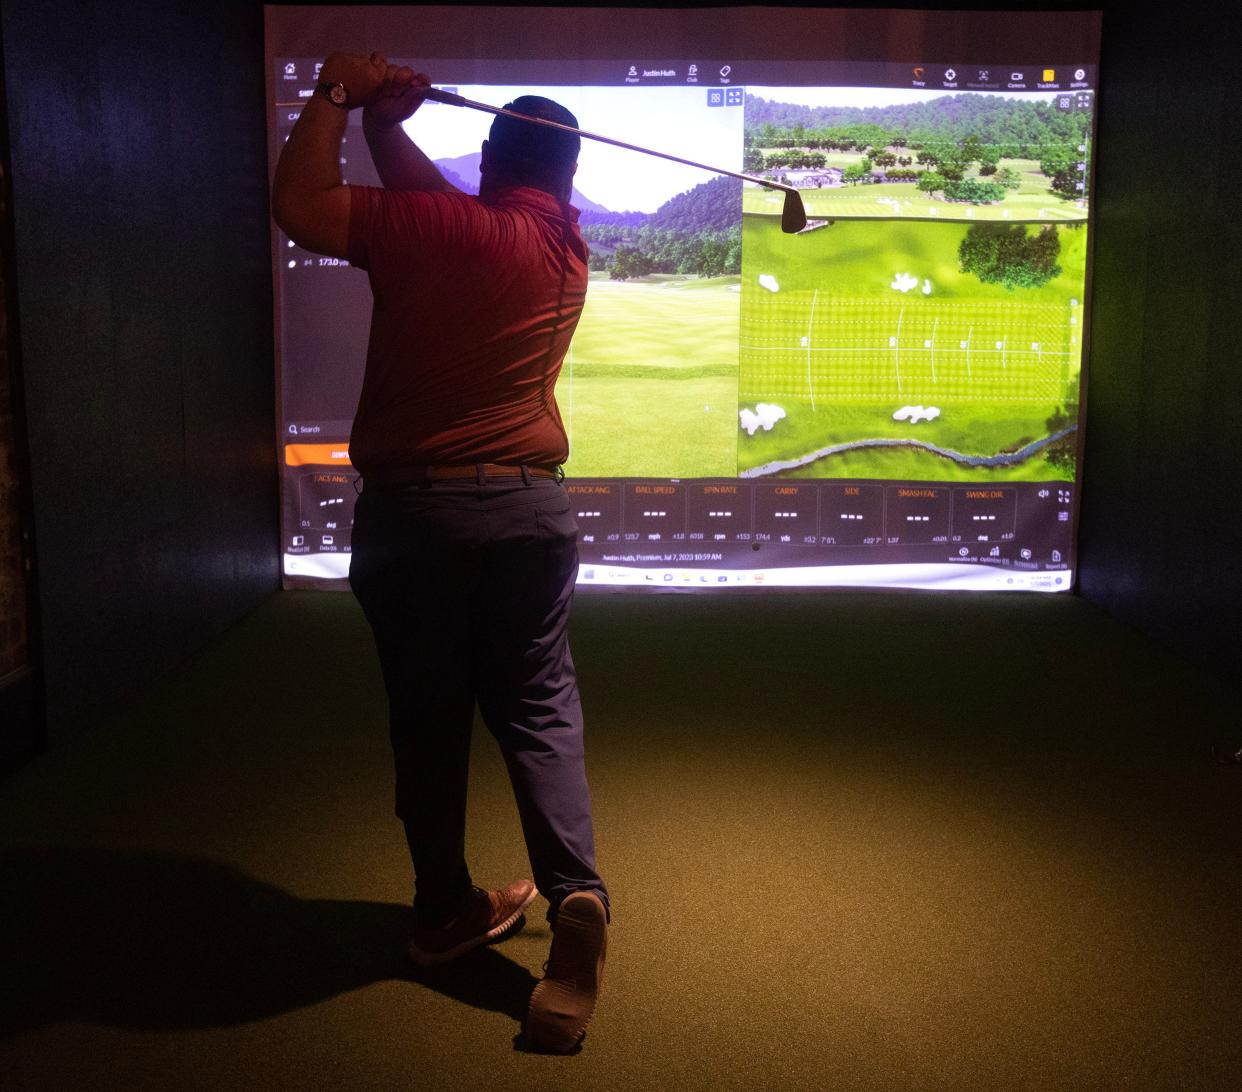 Justin Huth, golf pro at Hupp Gulf, demonstrates the Trackman Performance Studio 9 golf simulator. Hupp Gulf plans to open in downtown Canton in November.